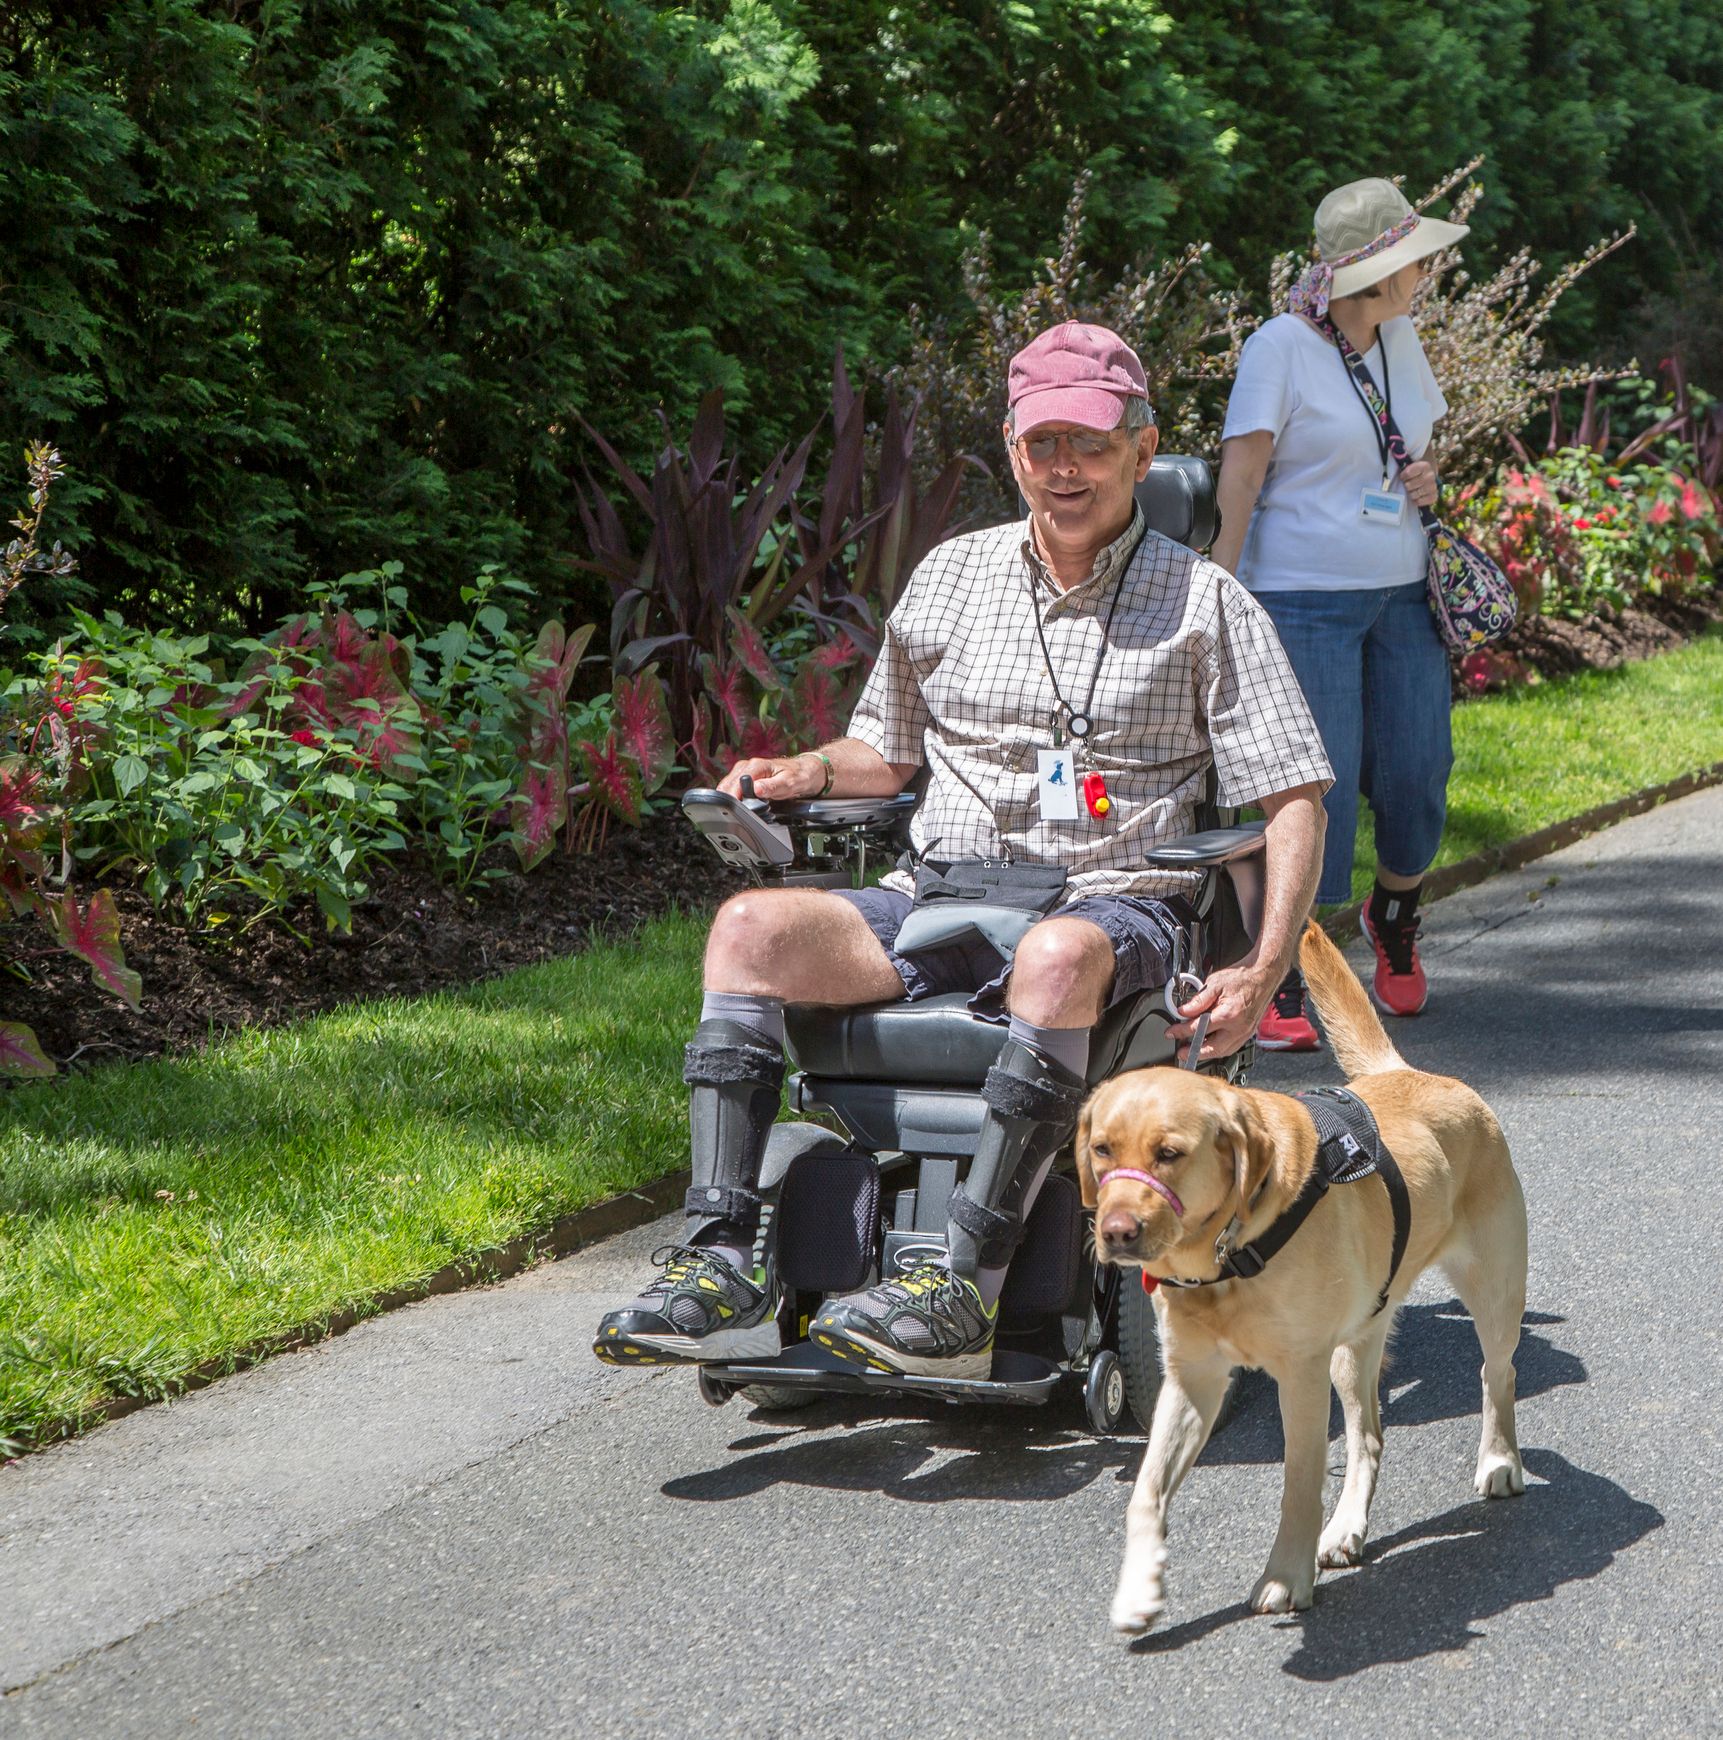 man in wheelchair with service dog